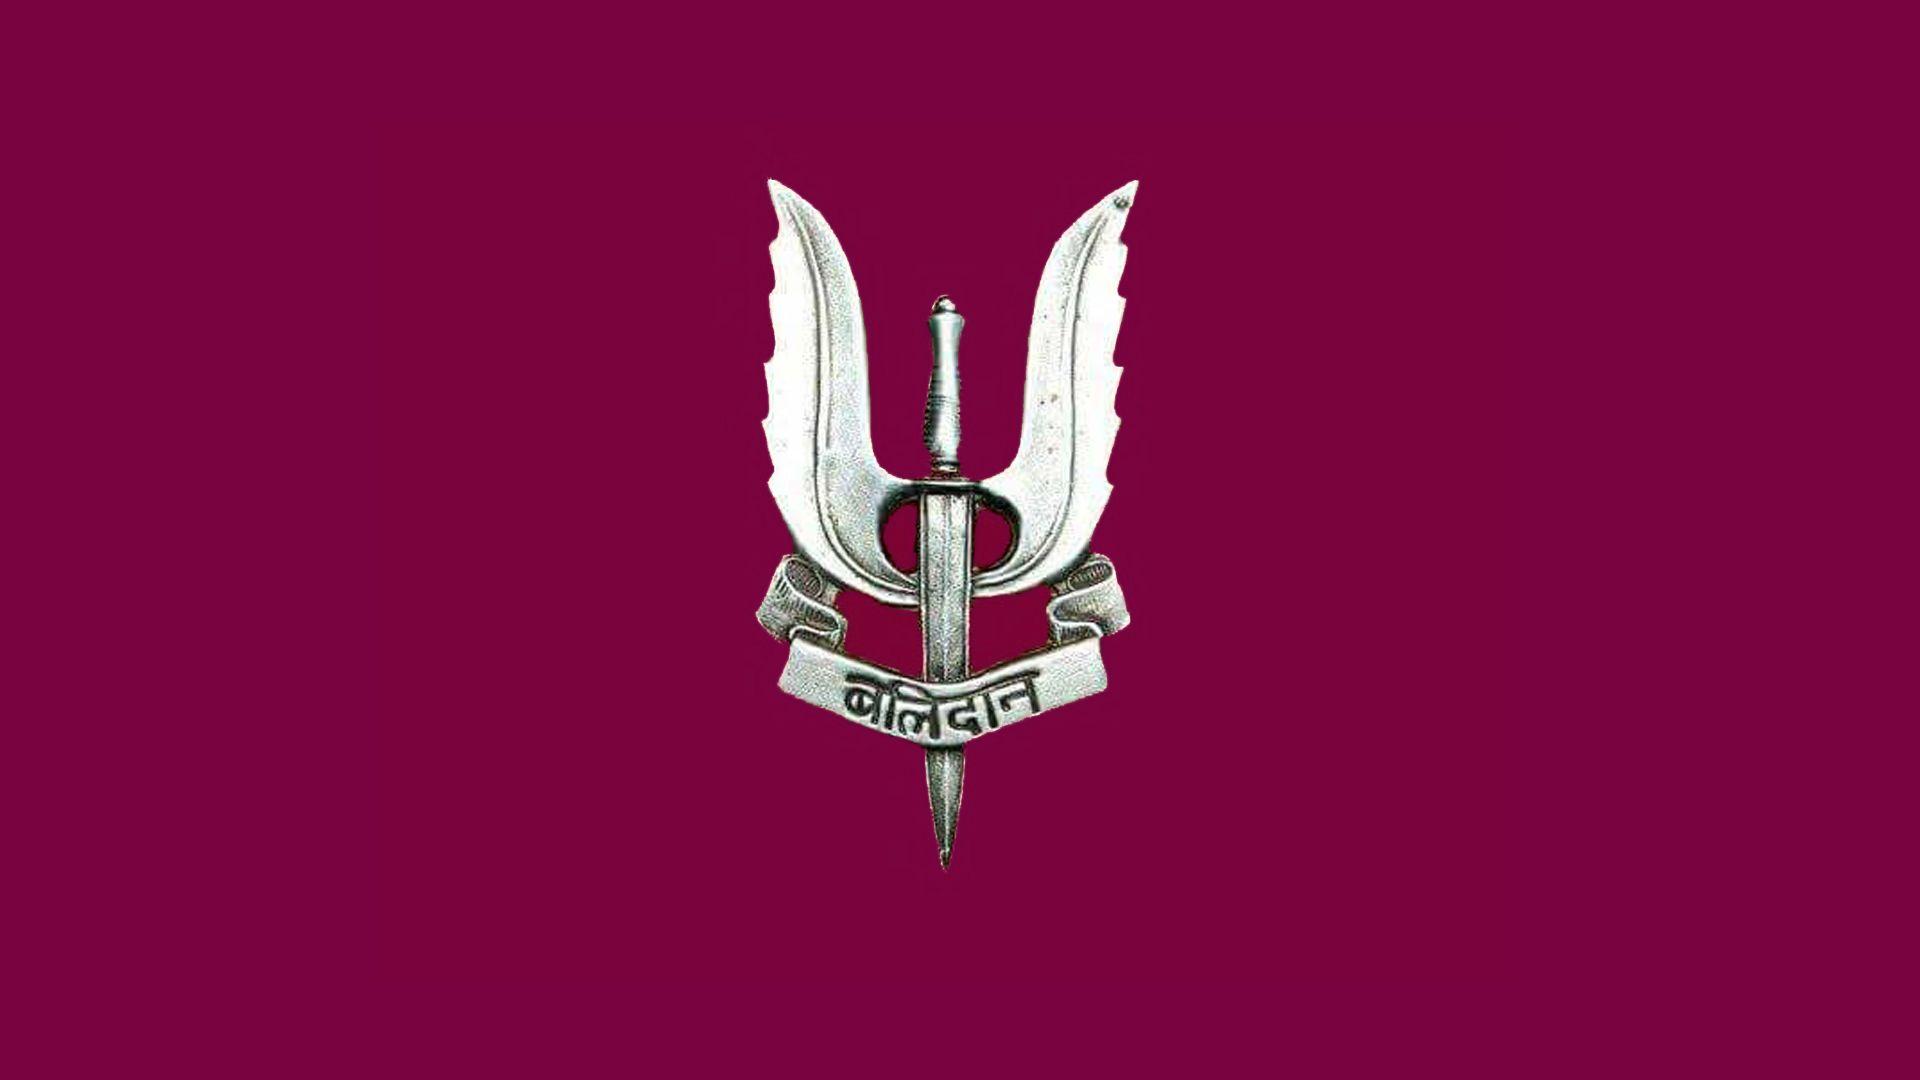 HD wallpaper Warrior Fighter Special forces Courage Maroon beret   Wallpaper Flare